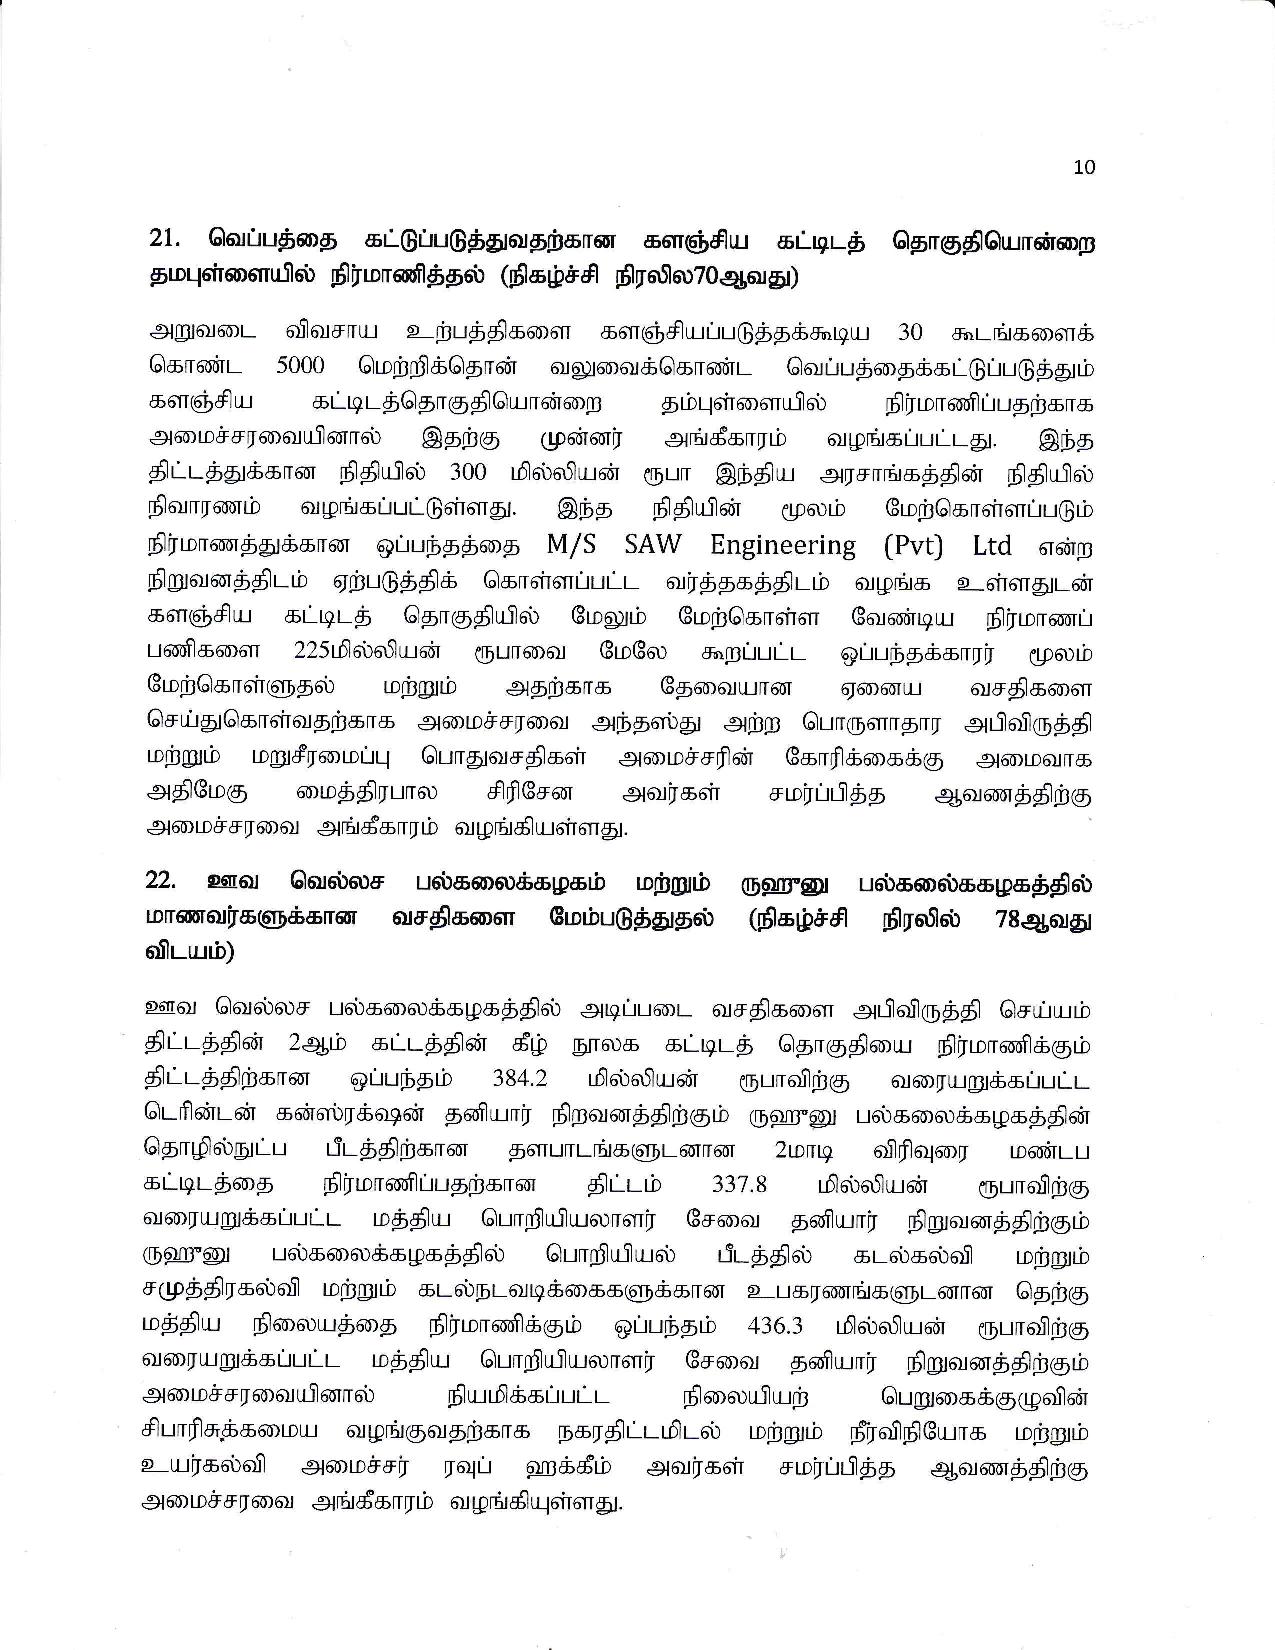 Cabinet Decision on 30.04.2019 T page 010